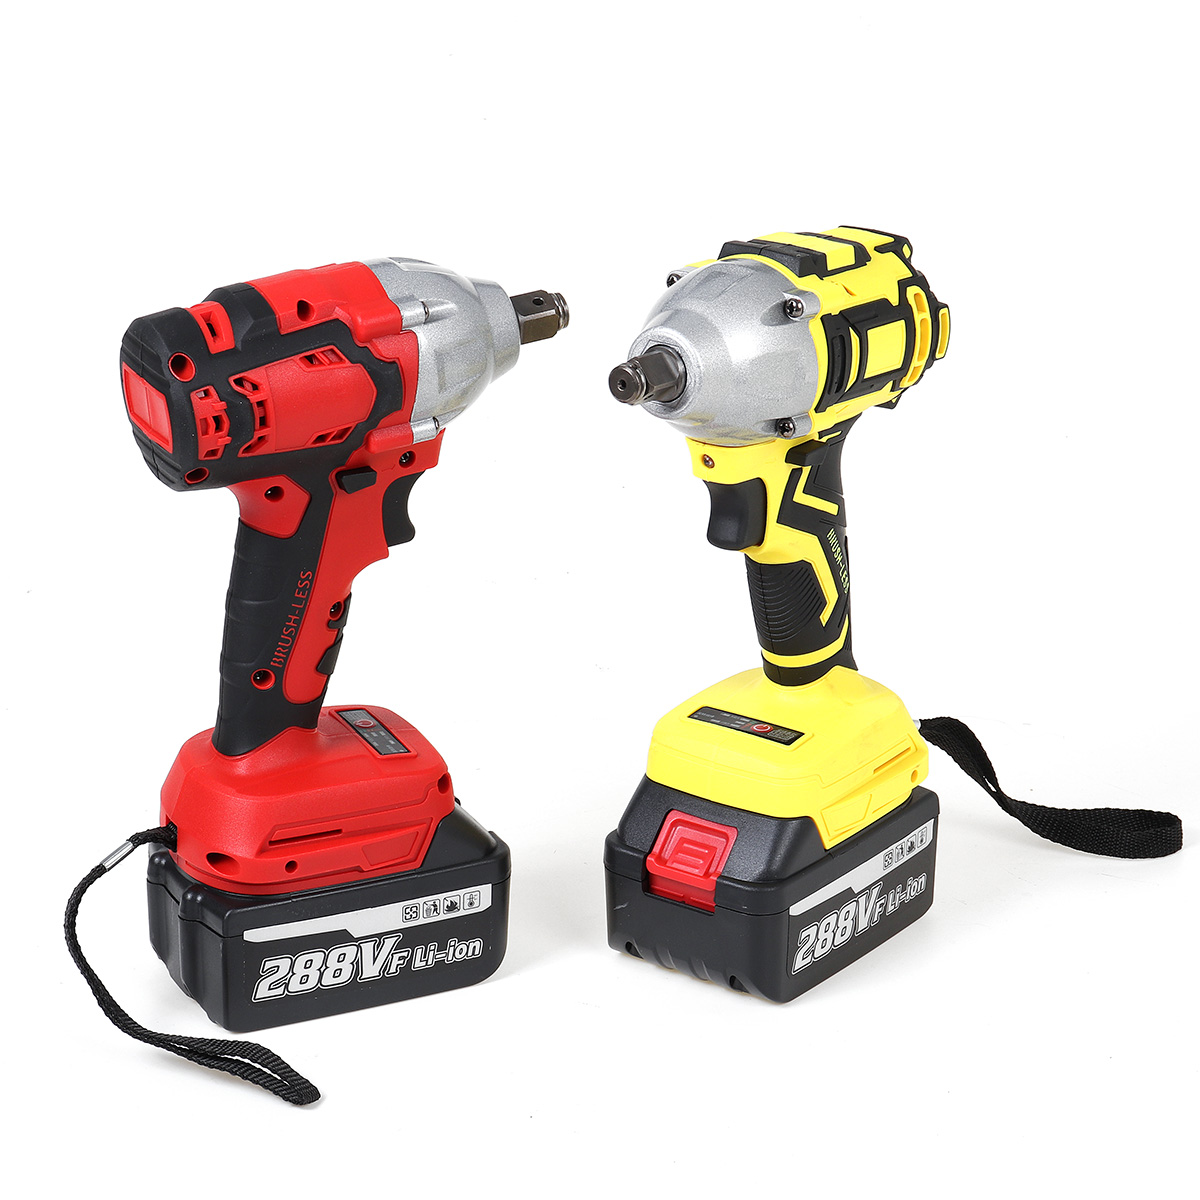 288VF-Adjustable-Speed-Brushless-Wrench-Cordless-Li-ion-Battery-Electrc-Wrench--With-LED-Light-1689704-7